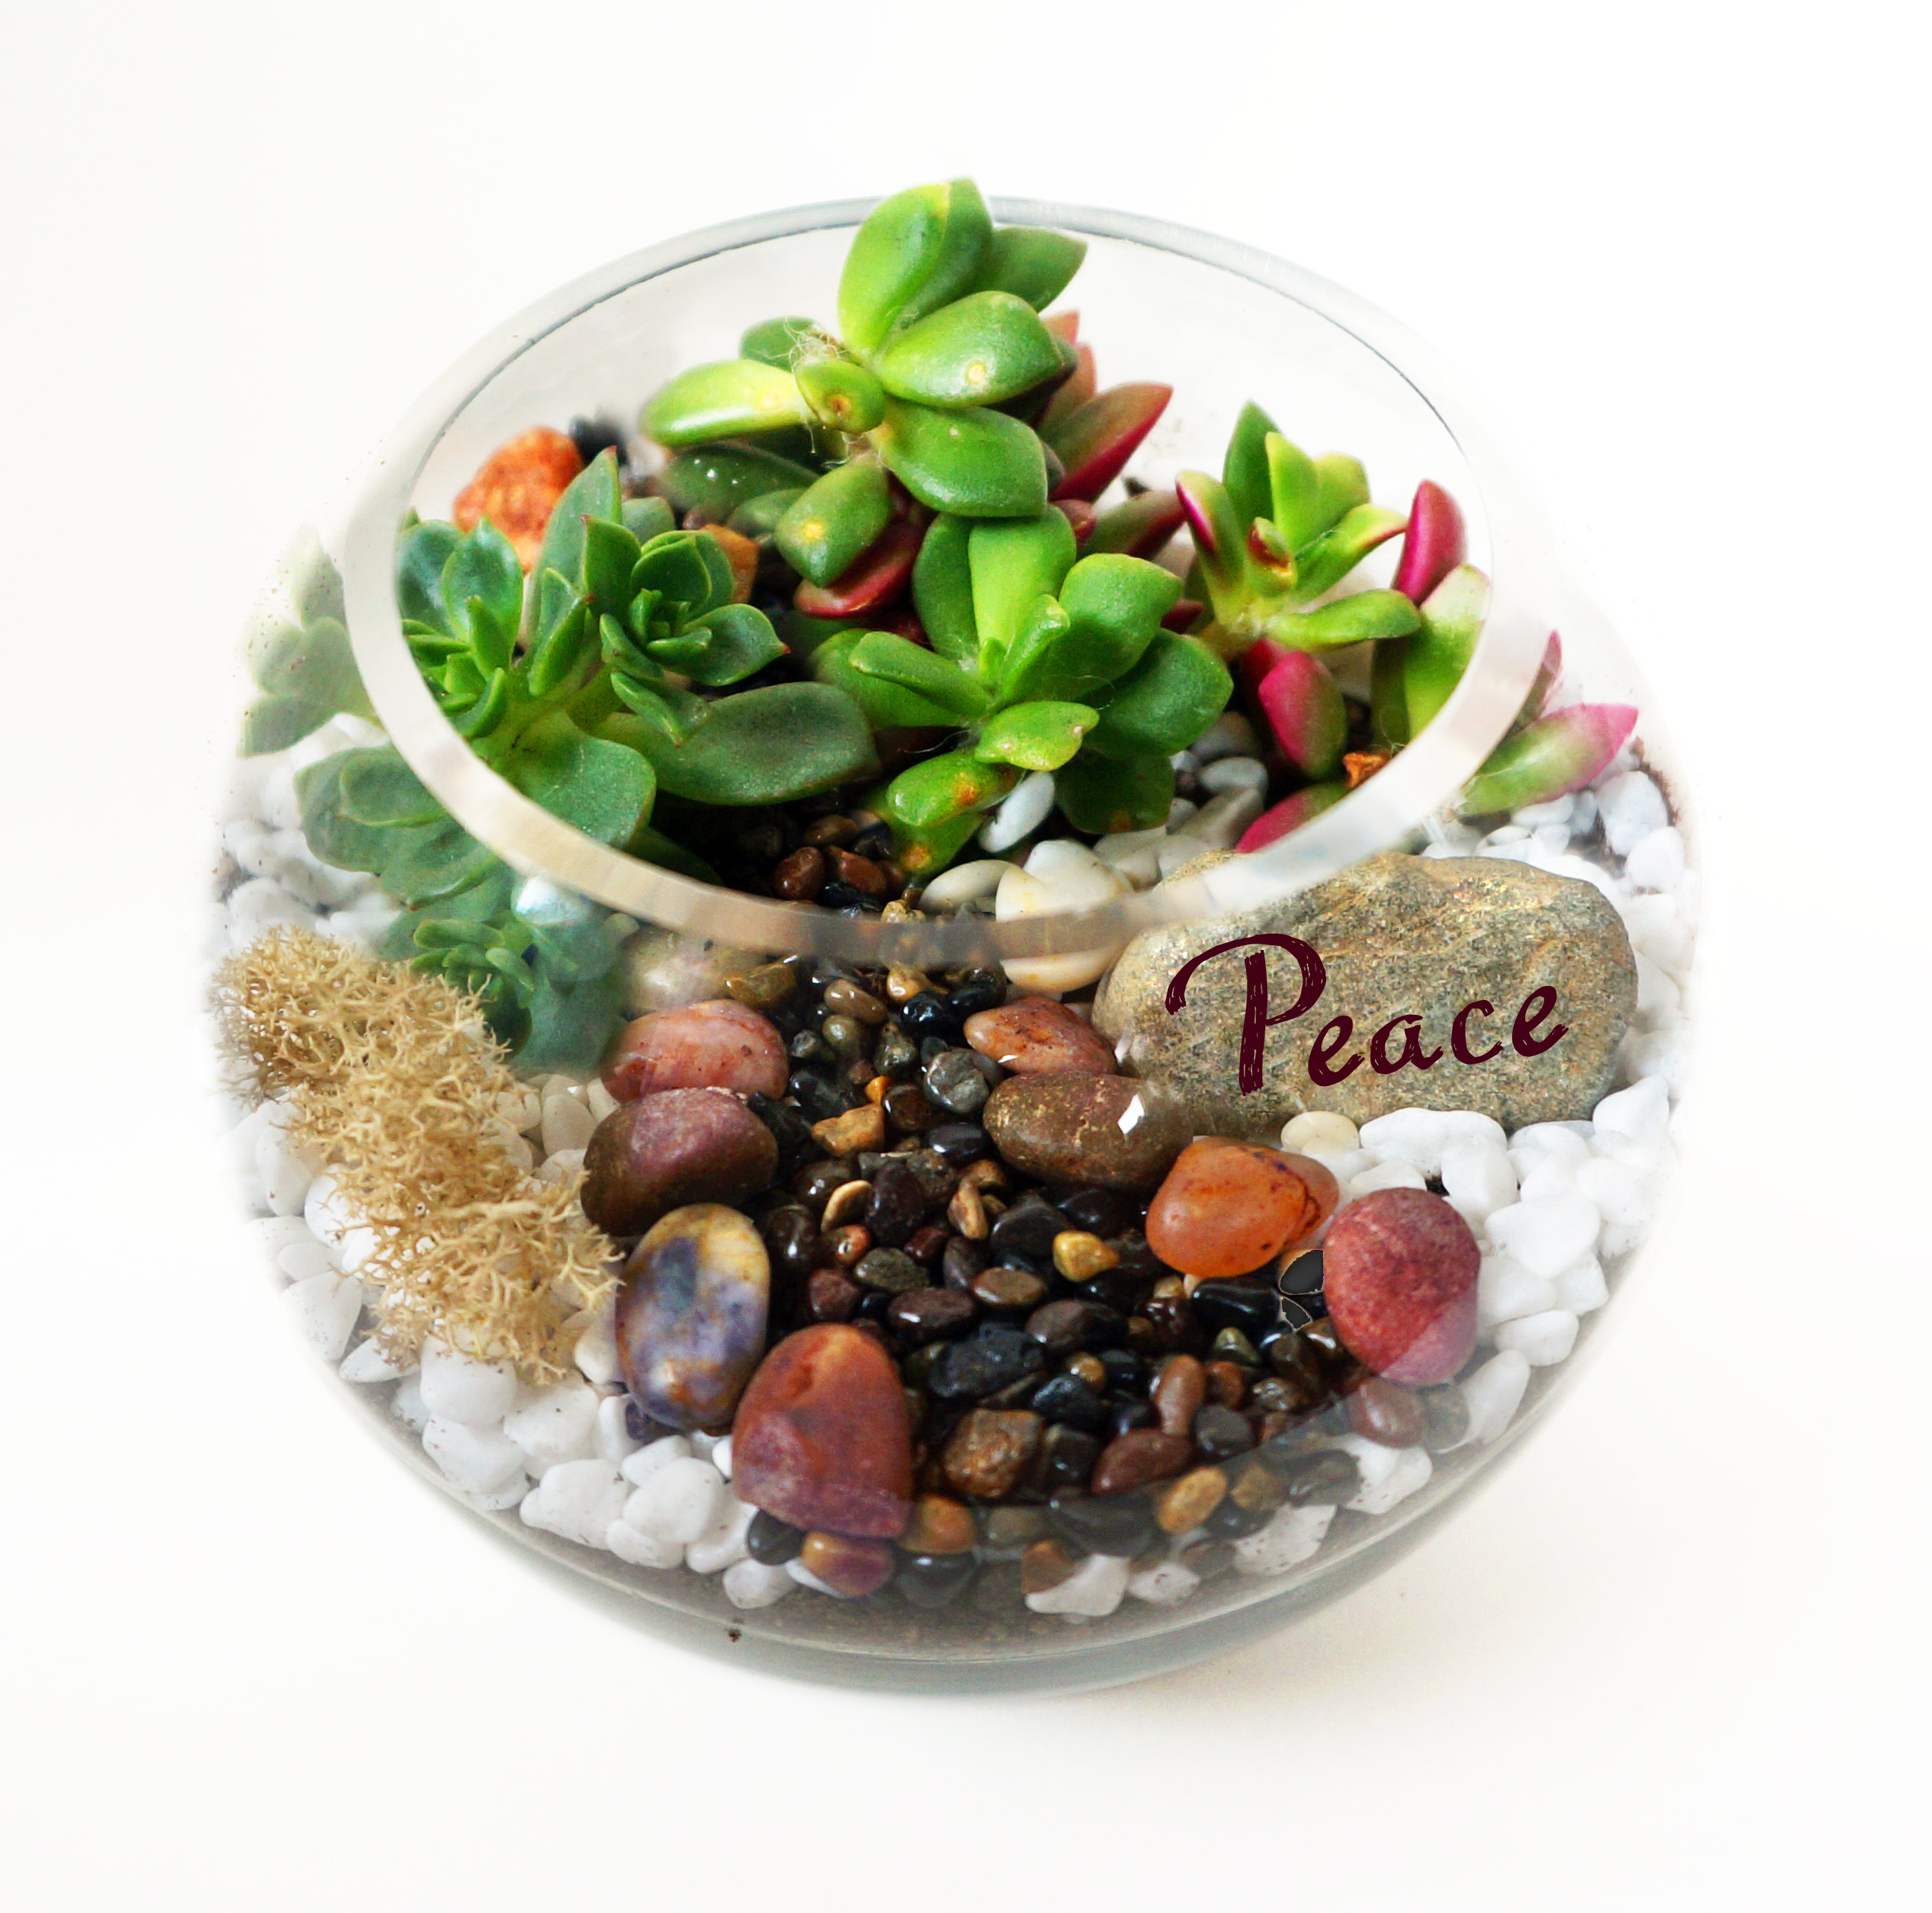 A Rose Bowl Succulent Terrarium WRiver Rocks and Peace Wish Rock plant nite project by Yaymaker